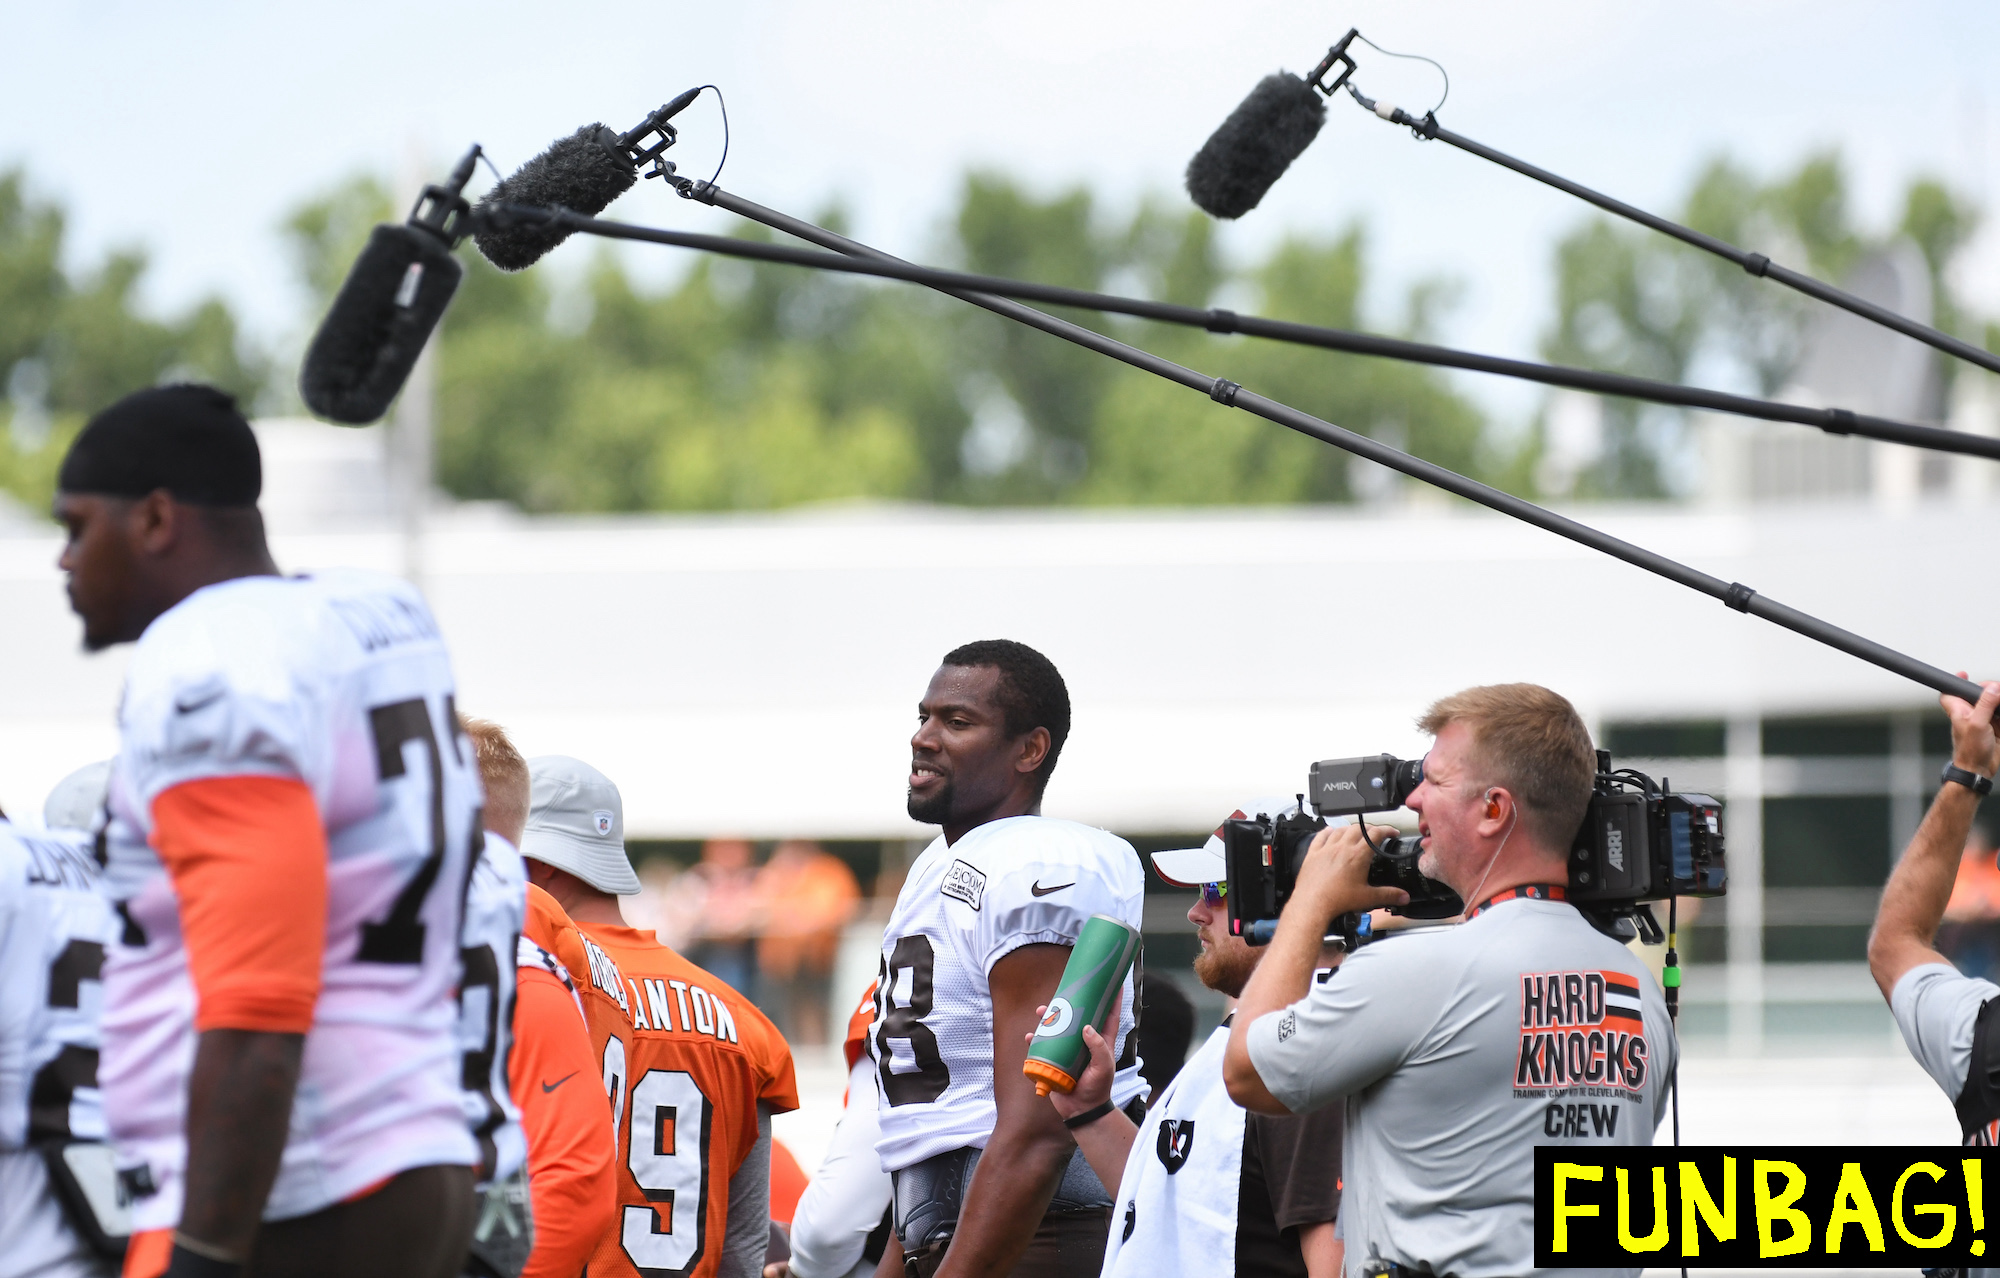 BEREA, OH - JULY 28: Microphones of HBO's "Hard Knocks" series hover over the Cleveland Browns offense during a training camp practice on July 28, 2018 at the Cleveland Browns training facility in Berea, Ohio. (Photo by Nick Cammett/Diamond Images/Getty Images)